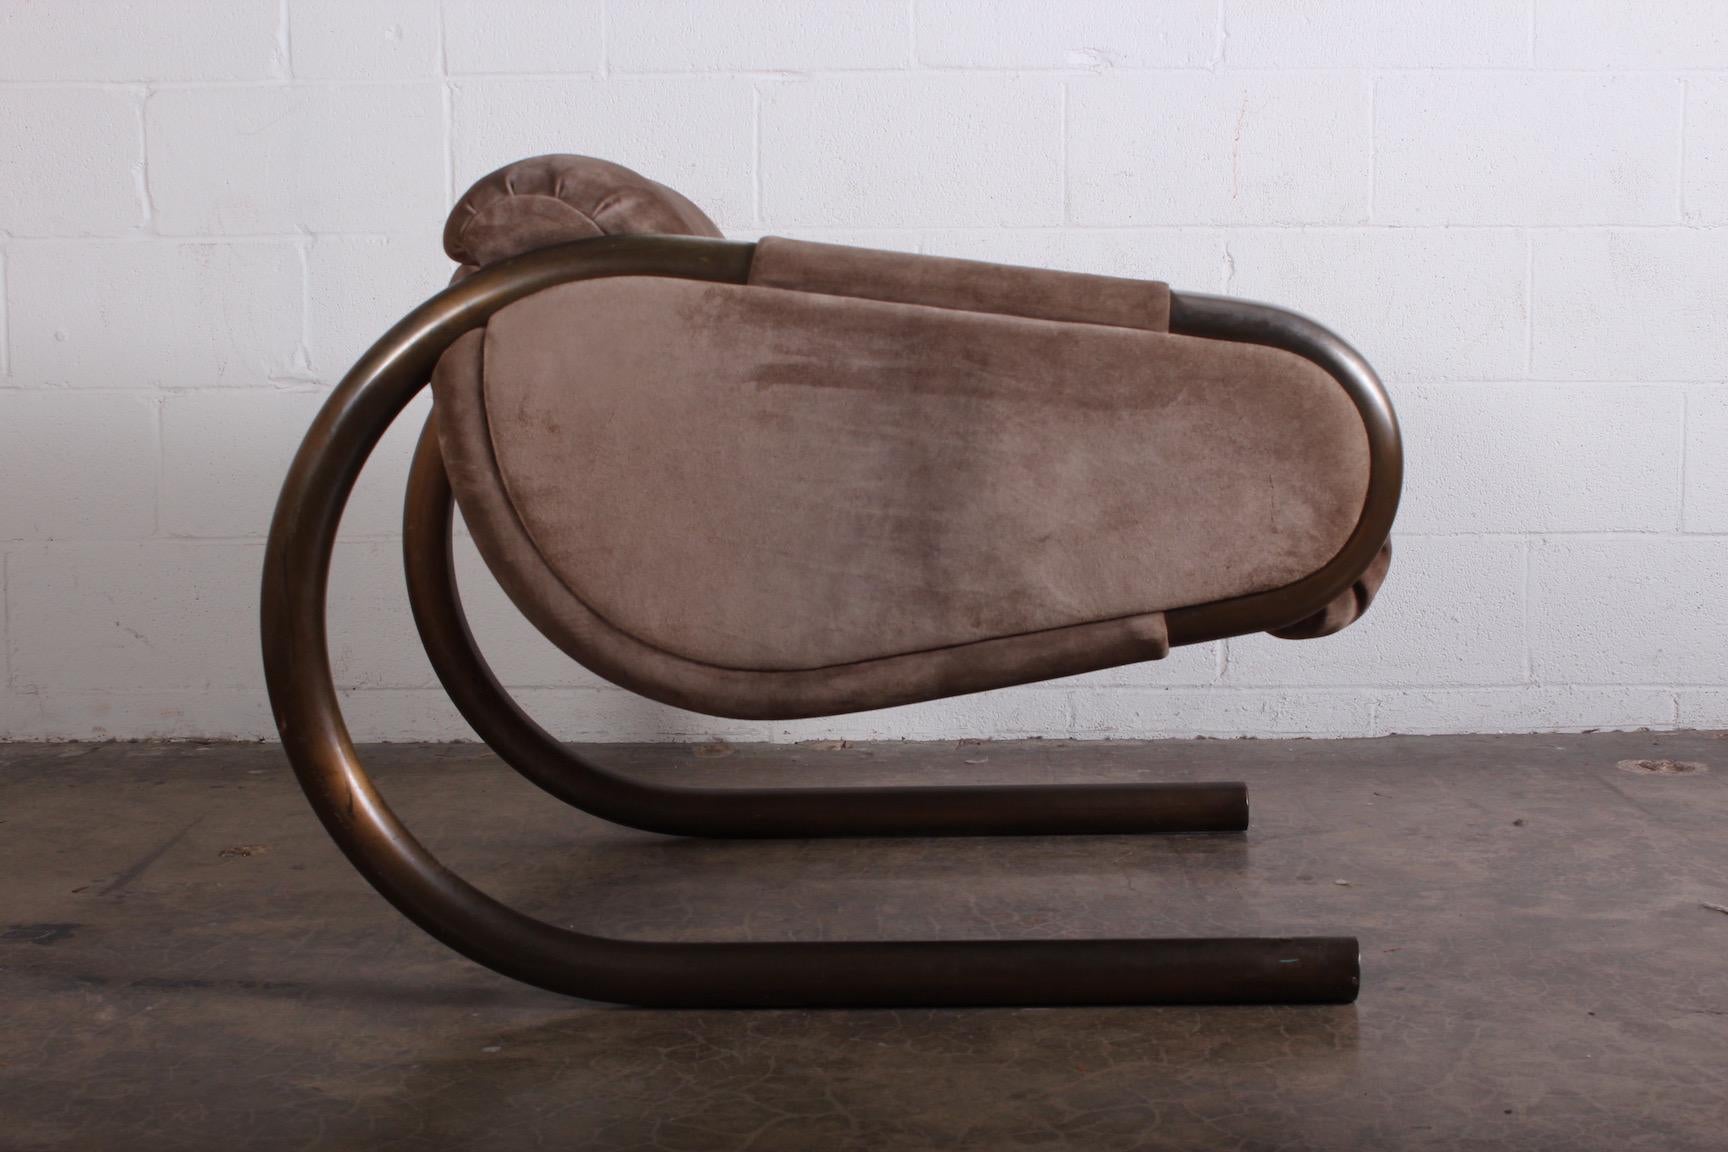 A large scale lounge chair with bronze plated frame and suede upholstery by Dunbar.